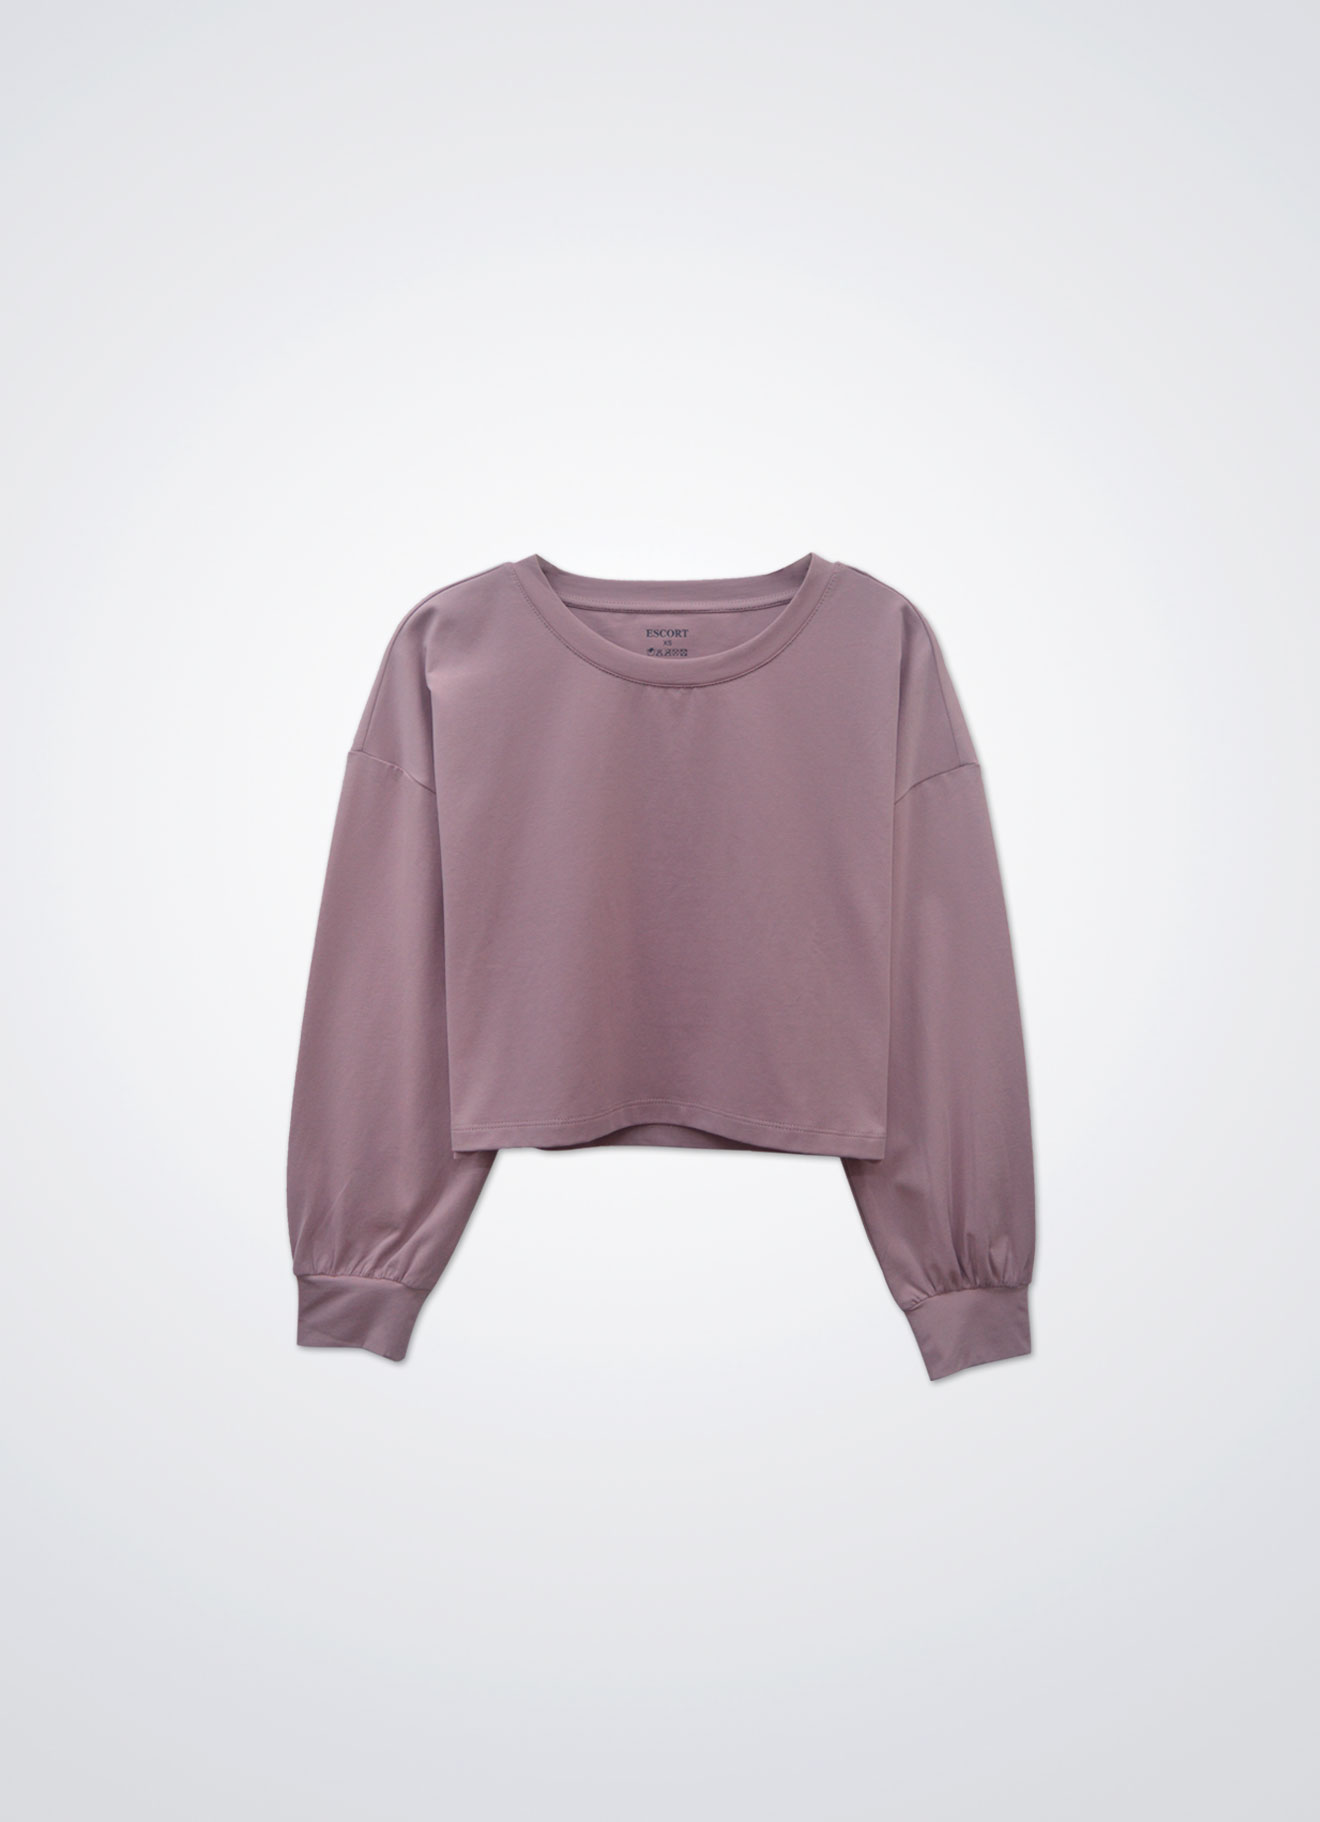 Misty-Rose by Long Sleeve Top